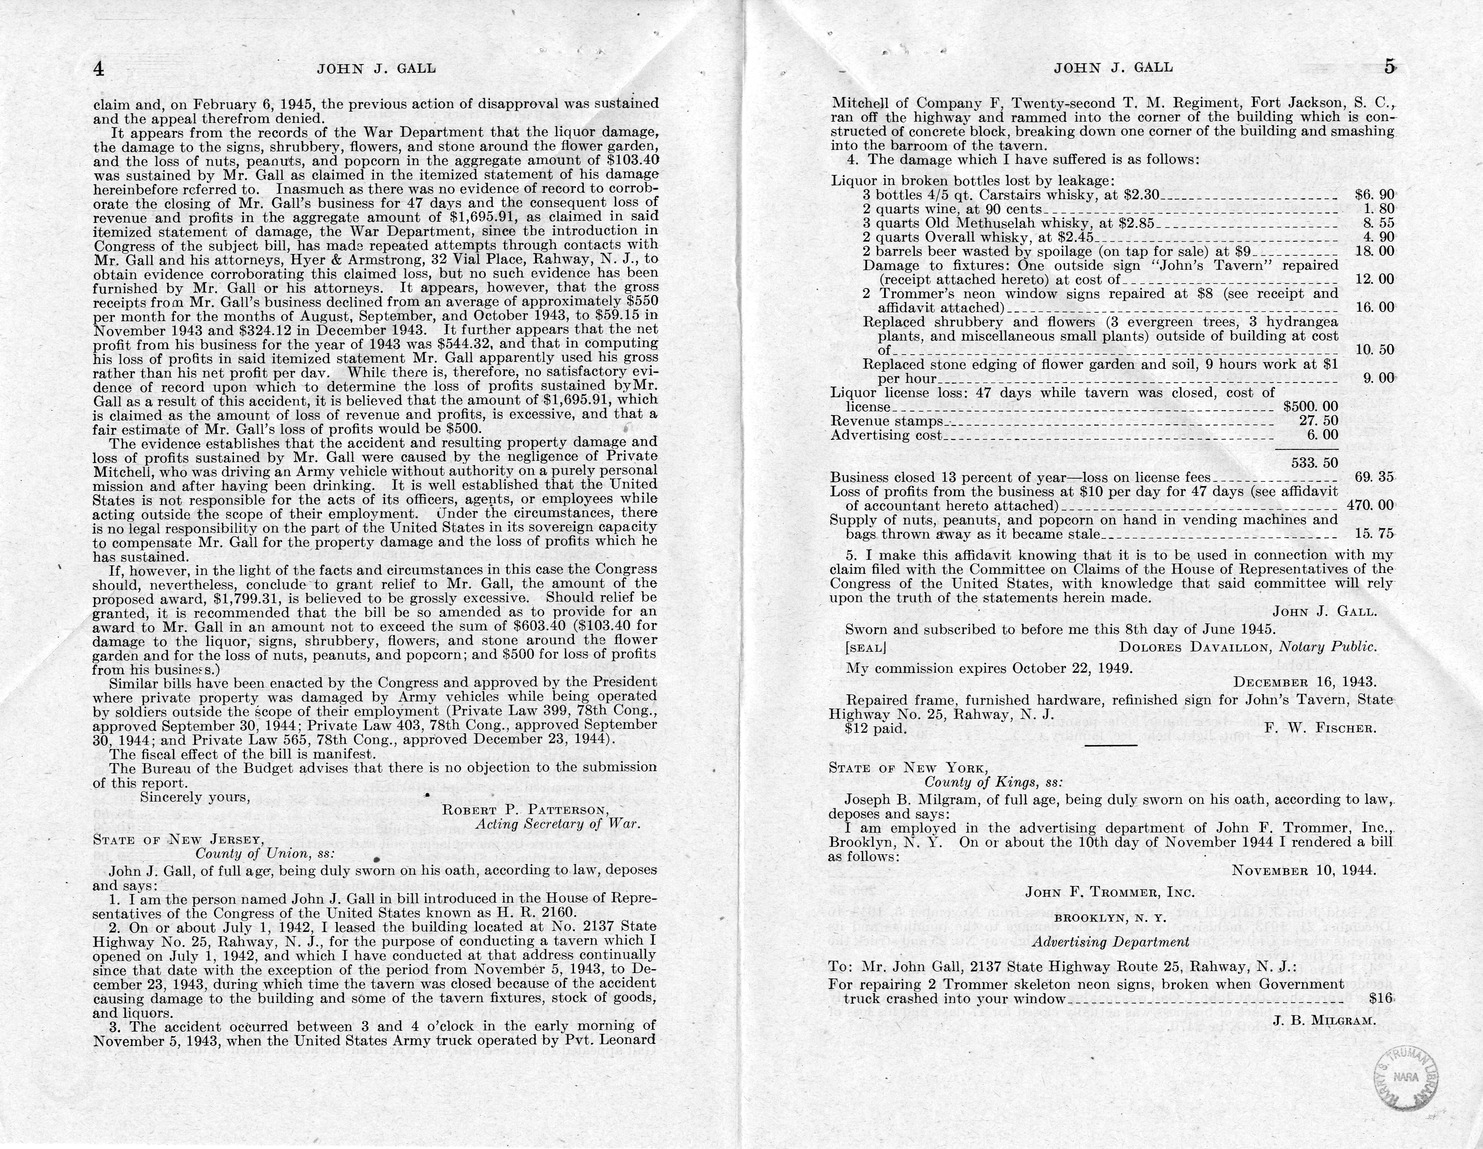 Memorandum from Frederick J. Bailey to M. C. Latta, H.R. 2160, For the Relief of John J. Gall, with Attachments